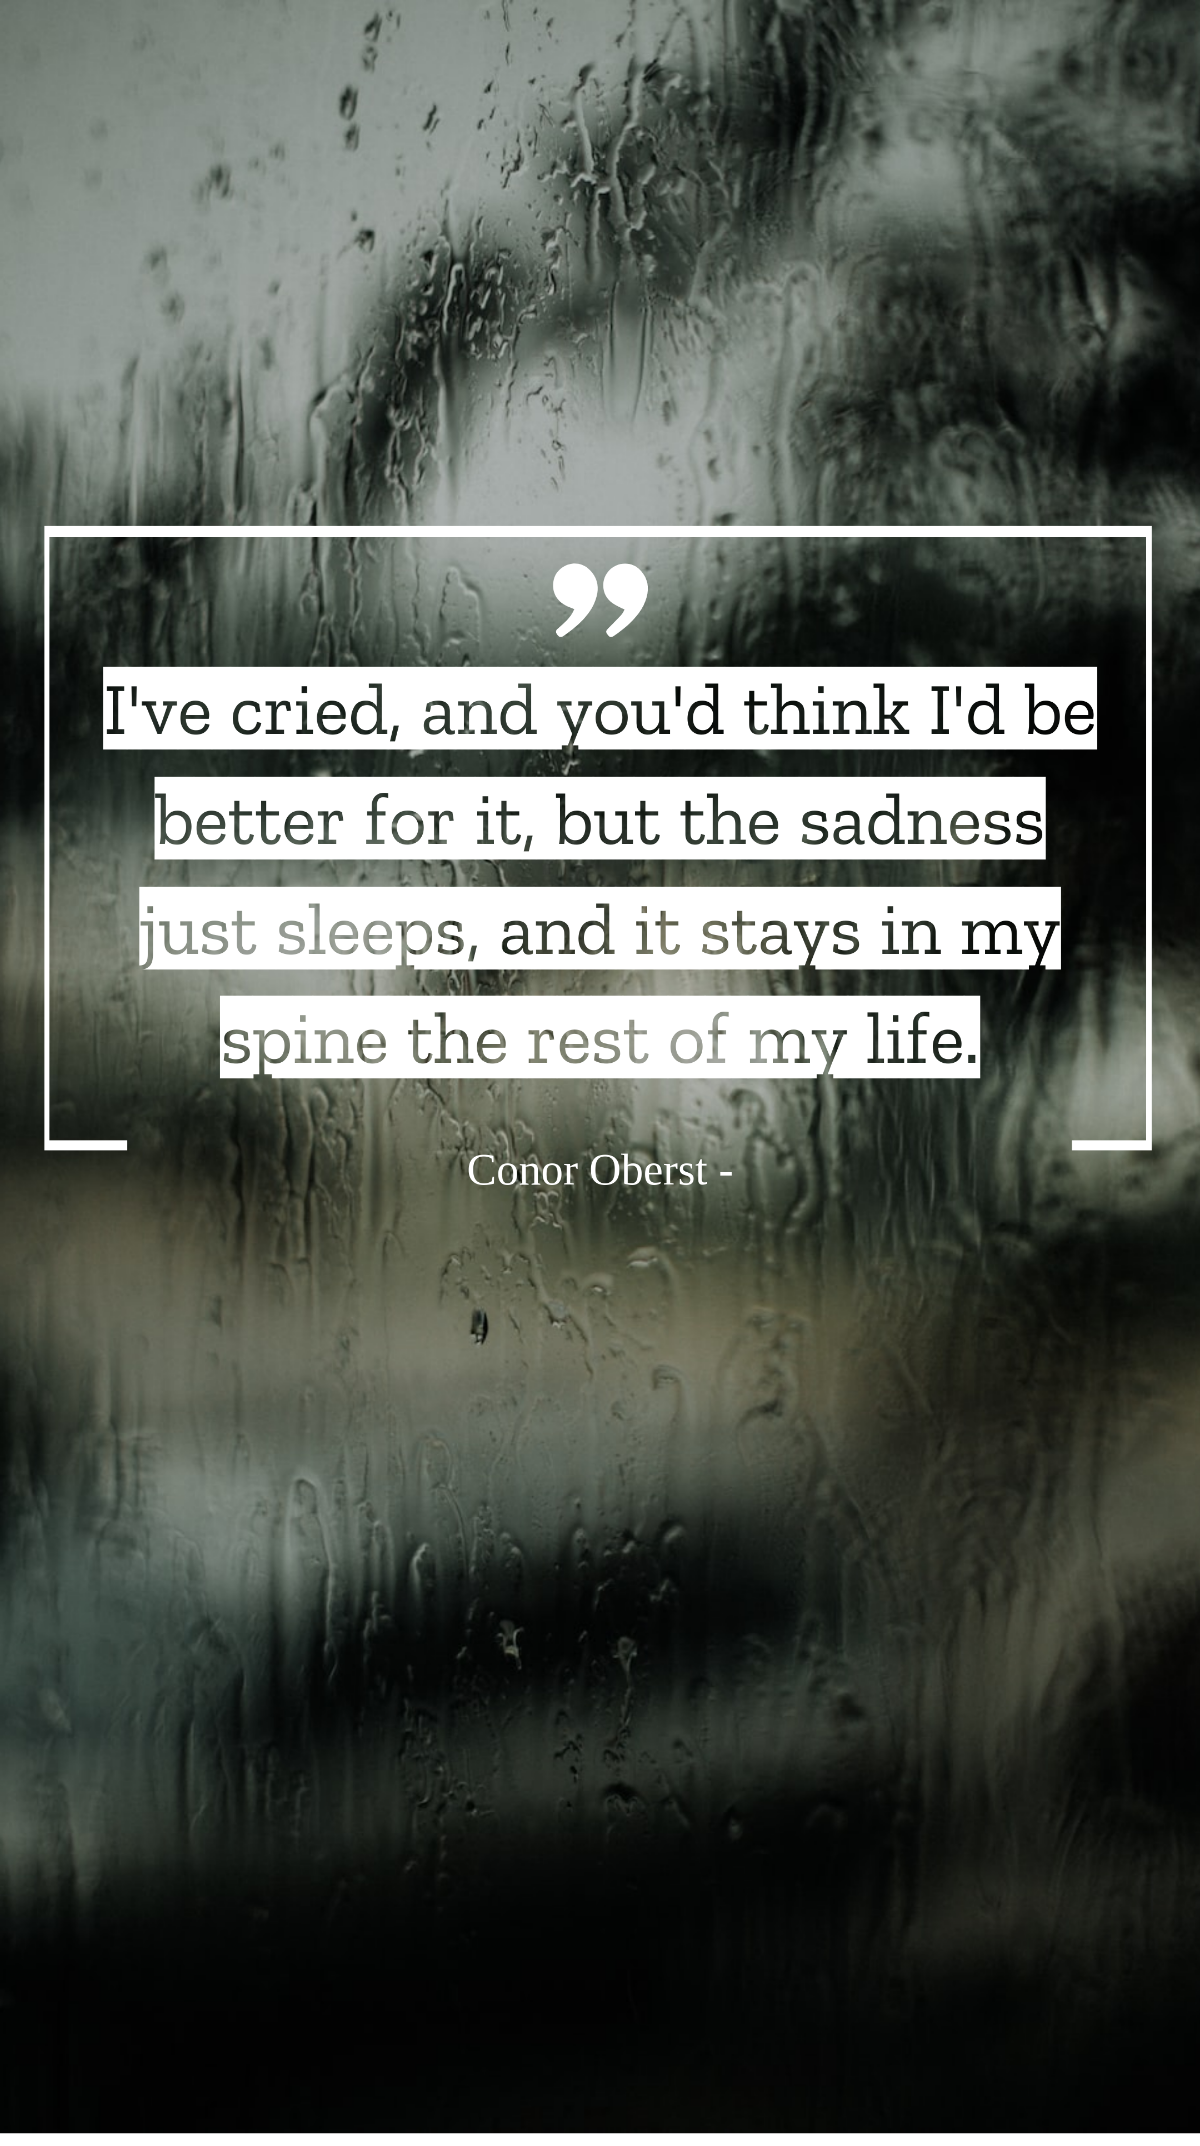 Conor Oberst - I've cried, and you'd think I'd be better for it, but the sadness just sleeps, and it stays in my spine the rest of my life. Template